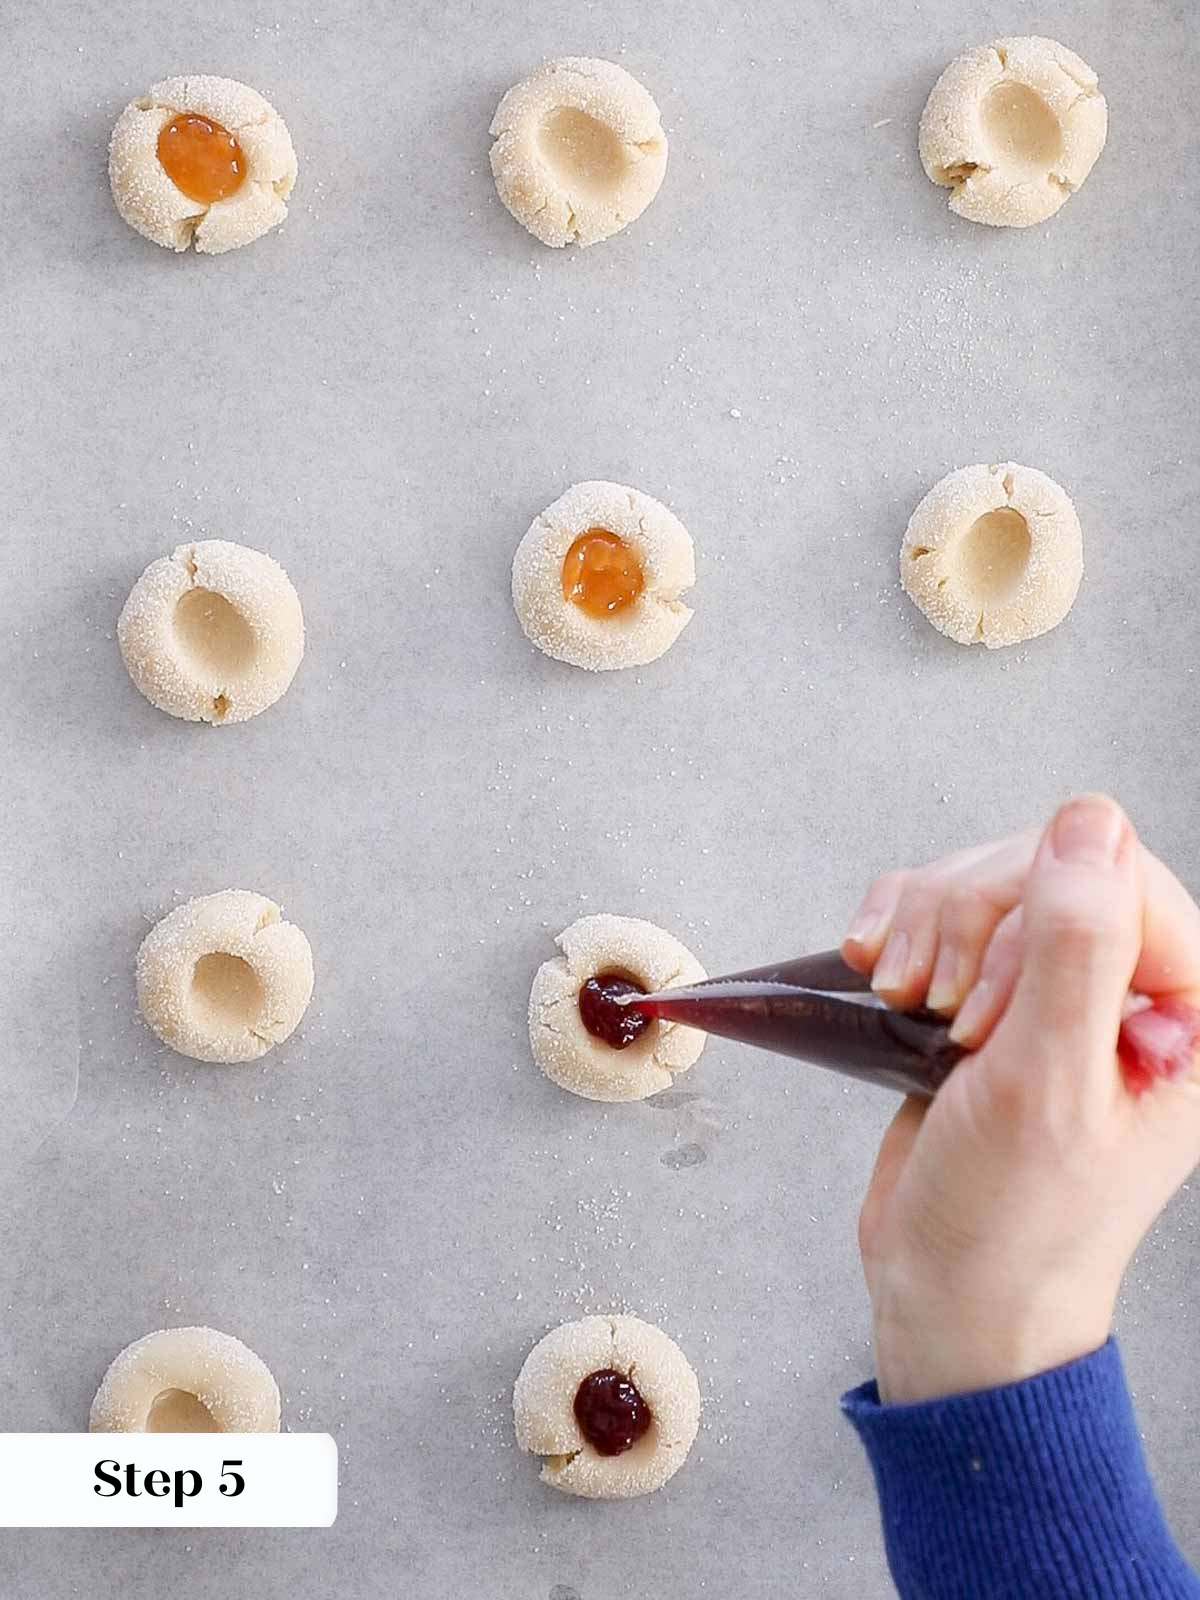 filling thumbprints with jam before baking.